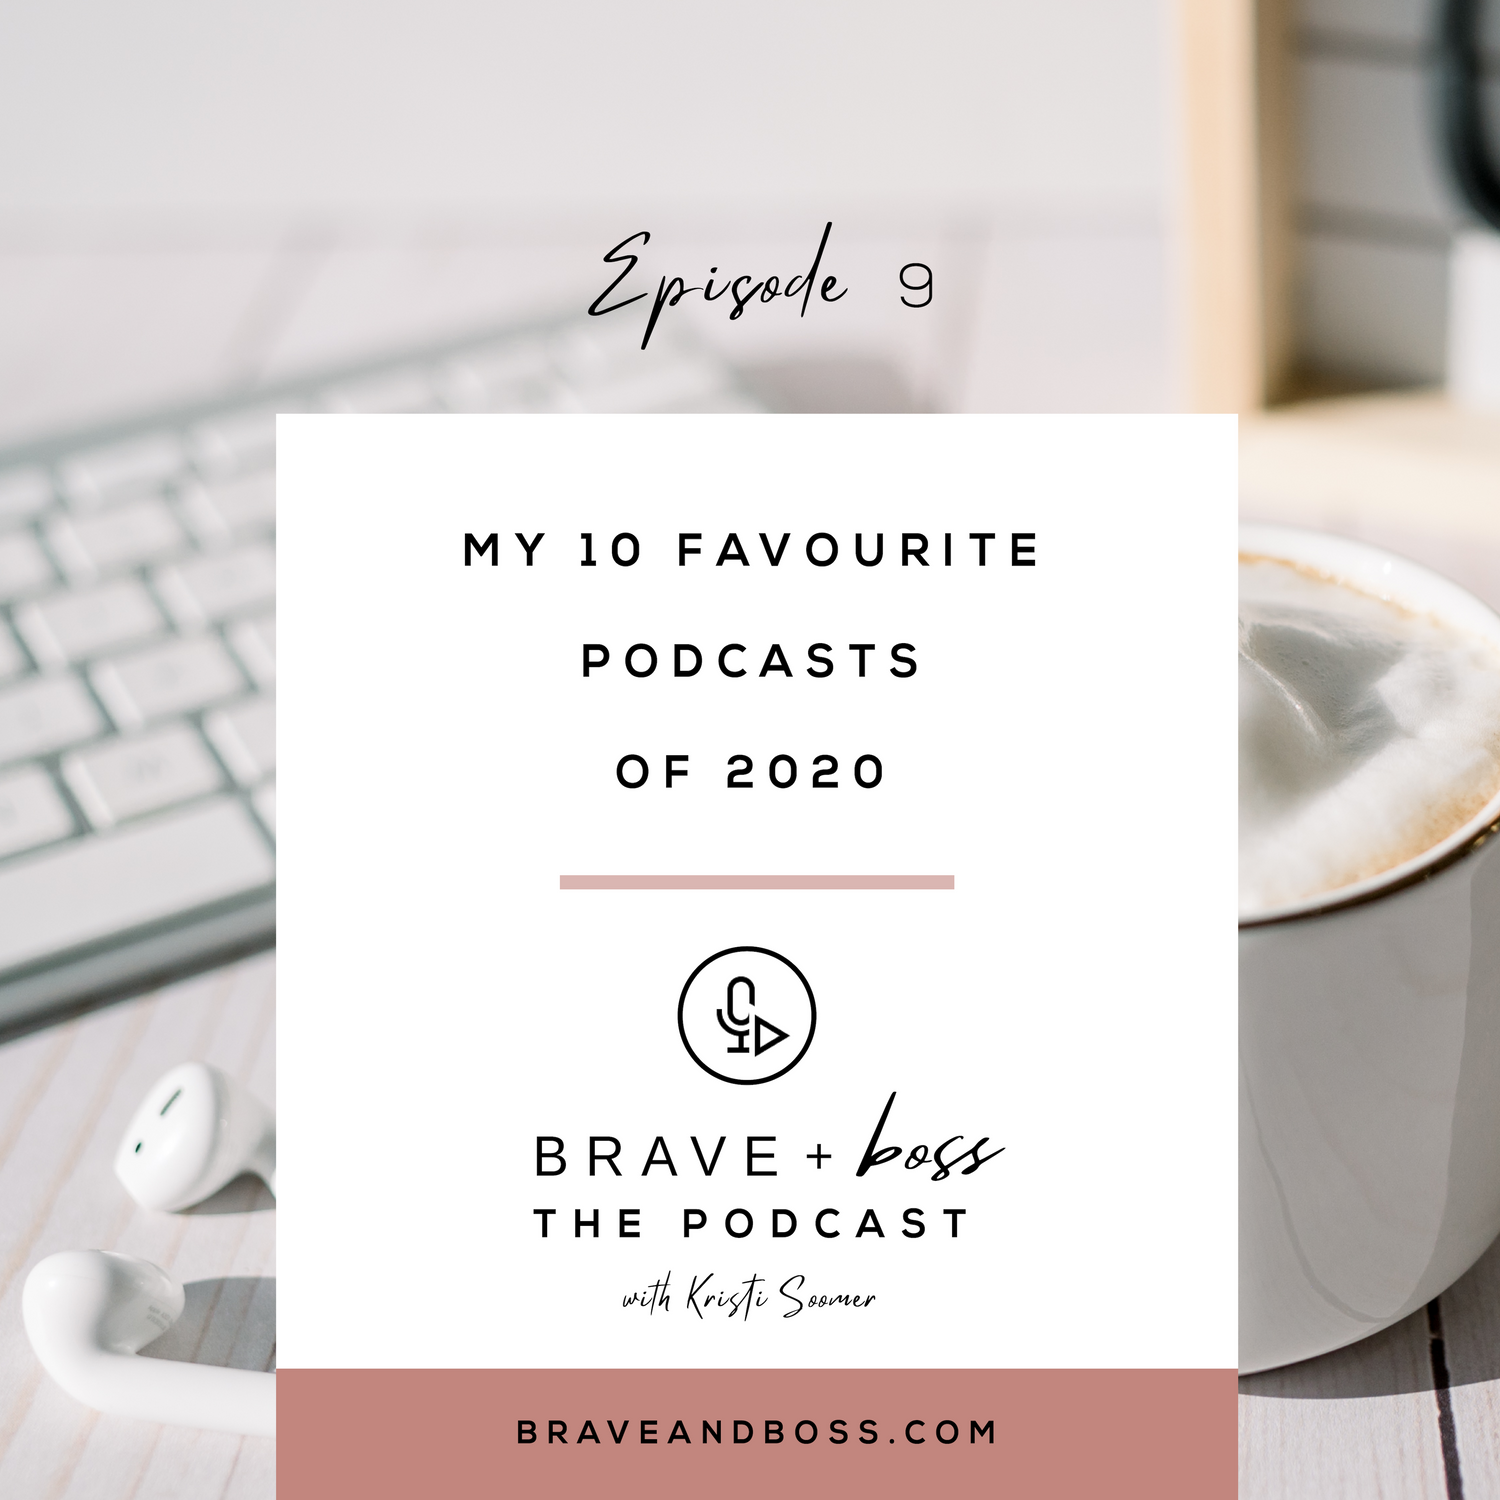 My 10 Favourite Podcasts of 2020